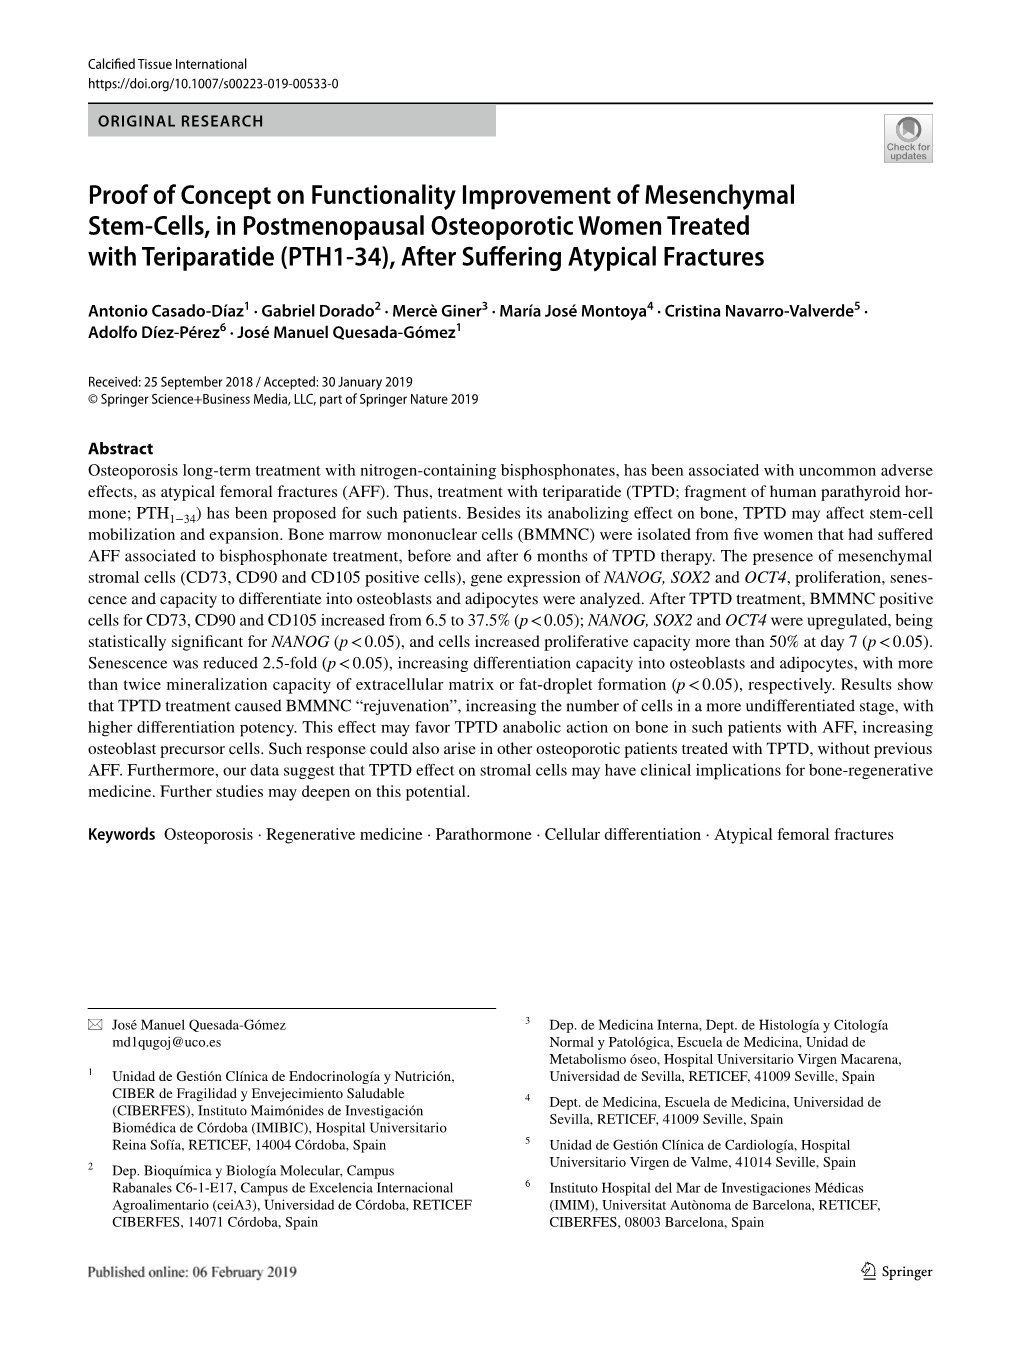 Proof of Concept on Functionality Improvement of Mesenchymal Stem